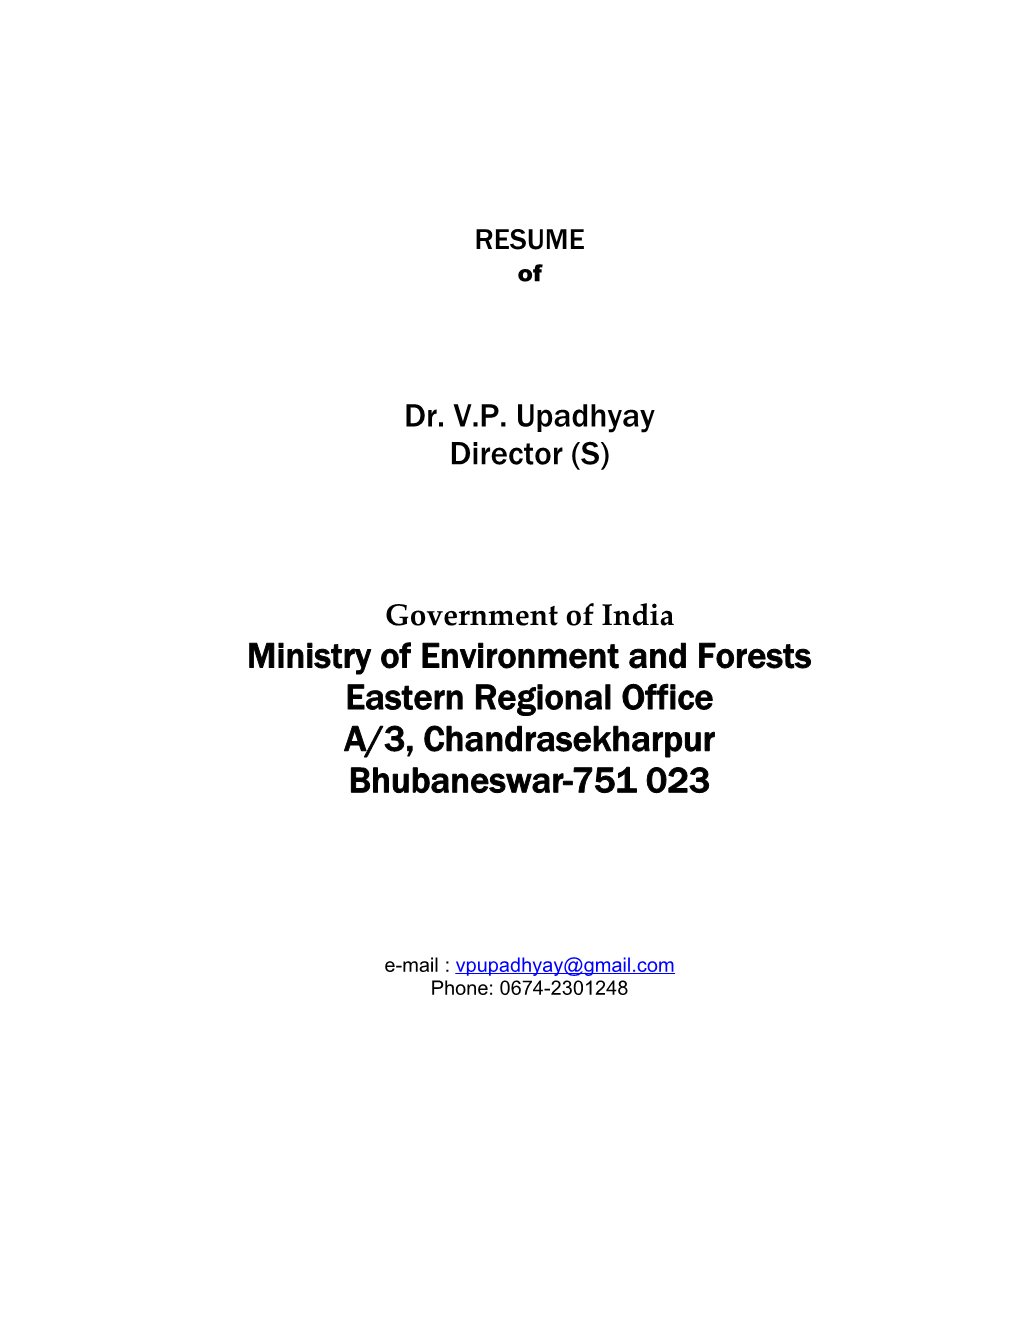 Ministry of Environment and Forests s3